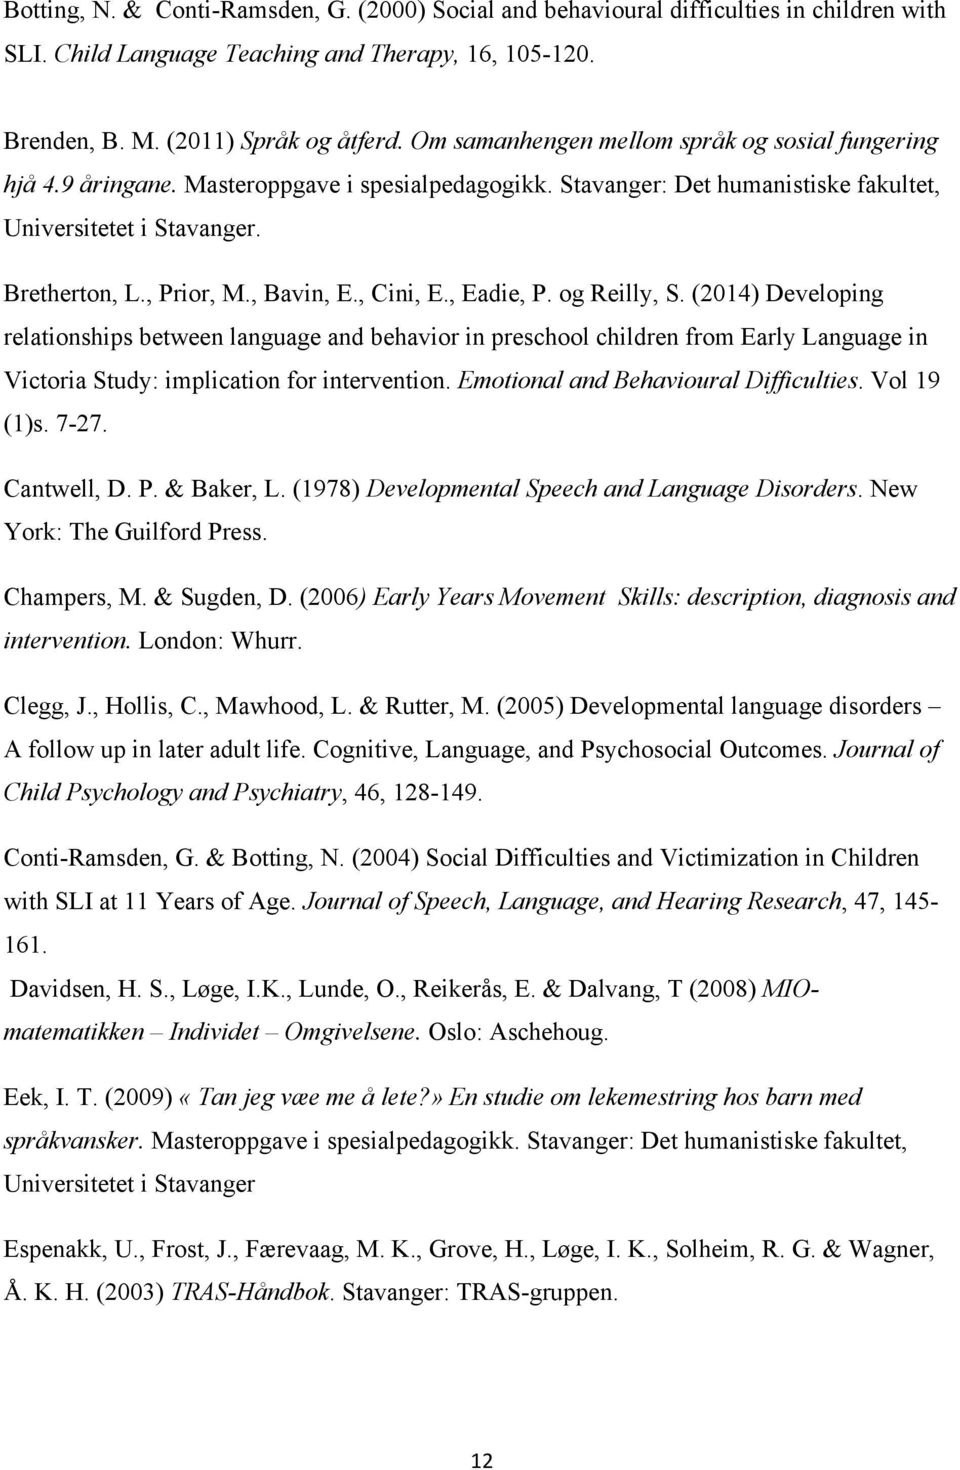 , Bavin, E., Cini, E., Eadie, P. og Reilly, S. (2014) Developing relationships between language and behavior in preschool children from Early Language in Victoria Study: implication for intervention.